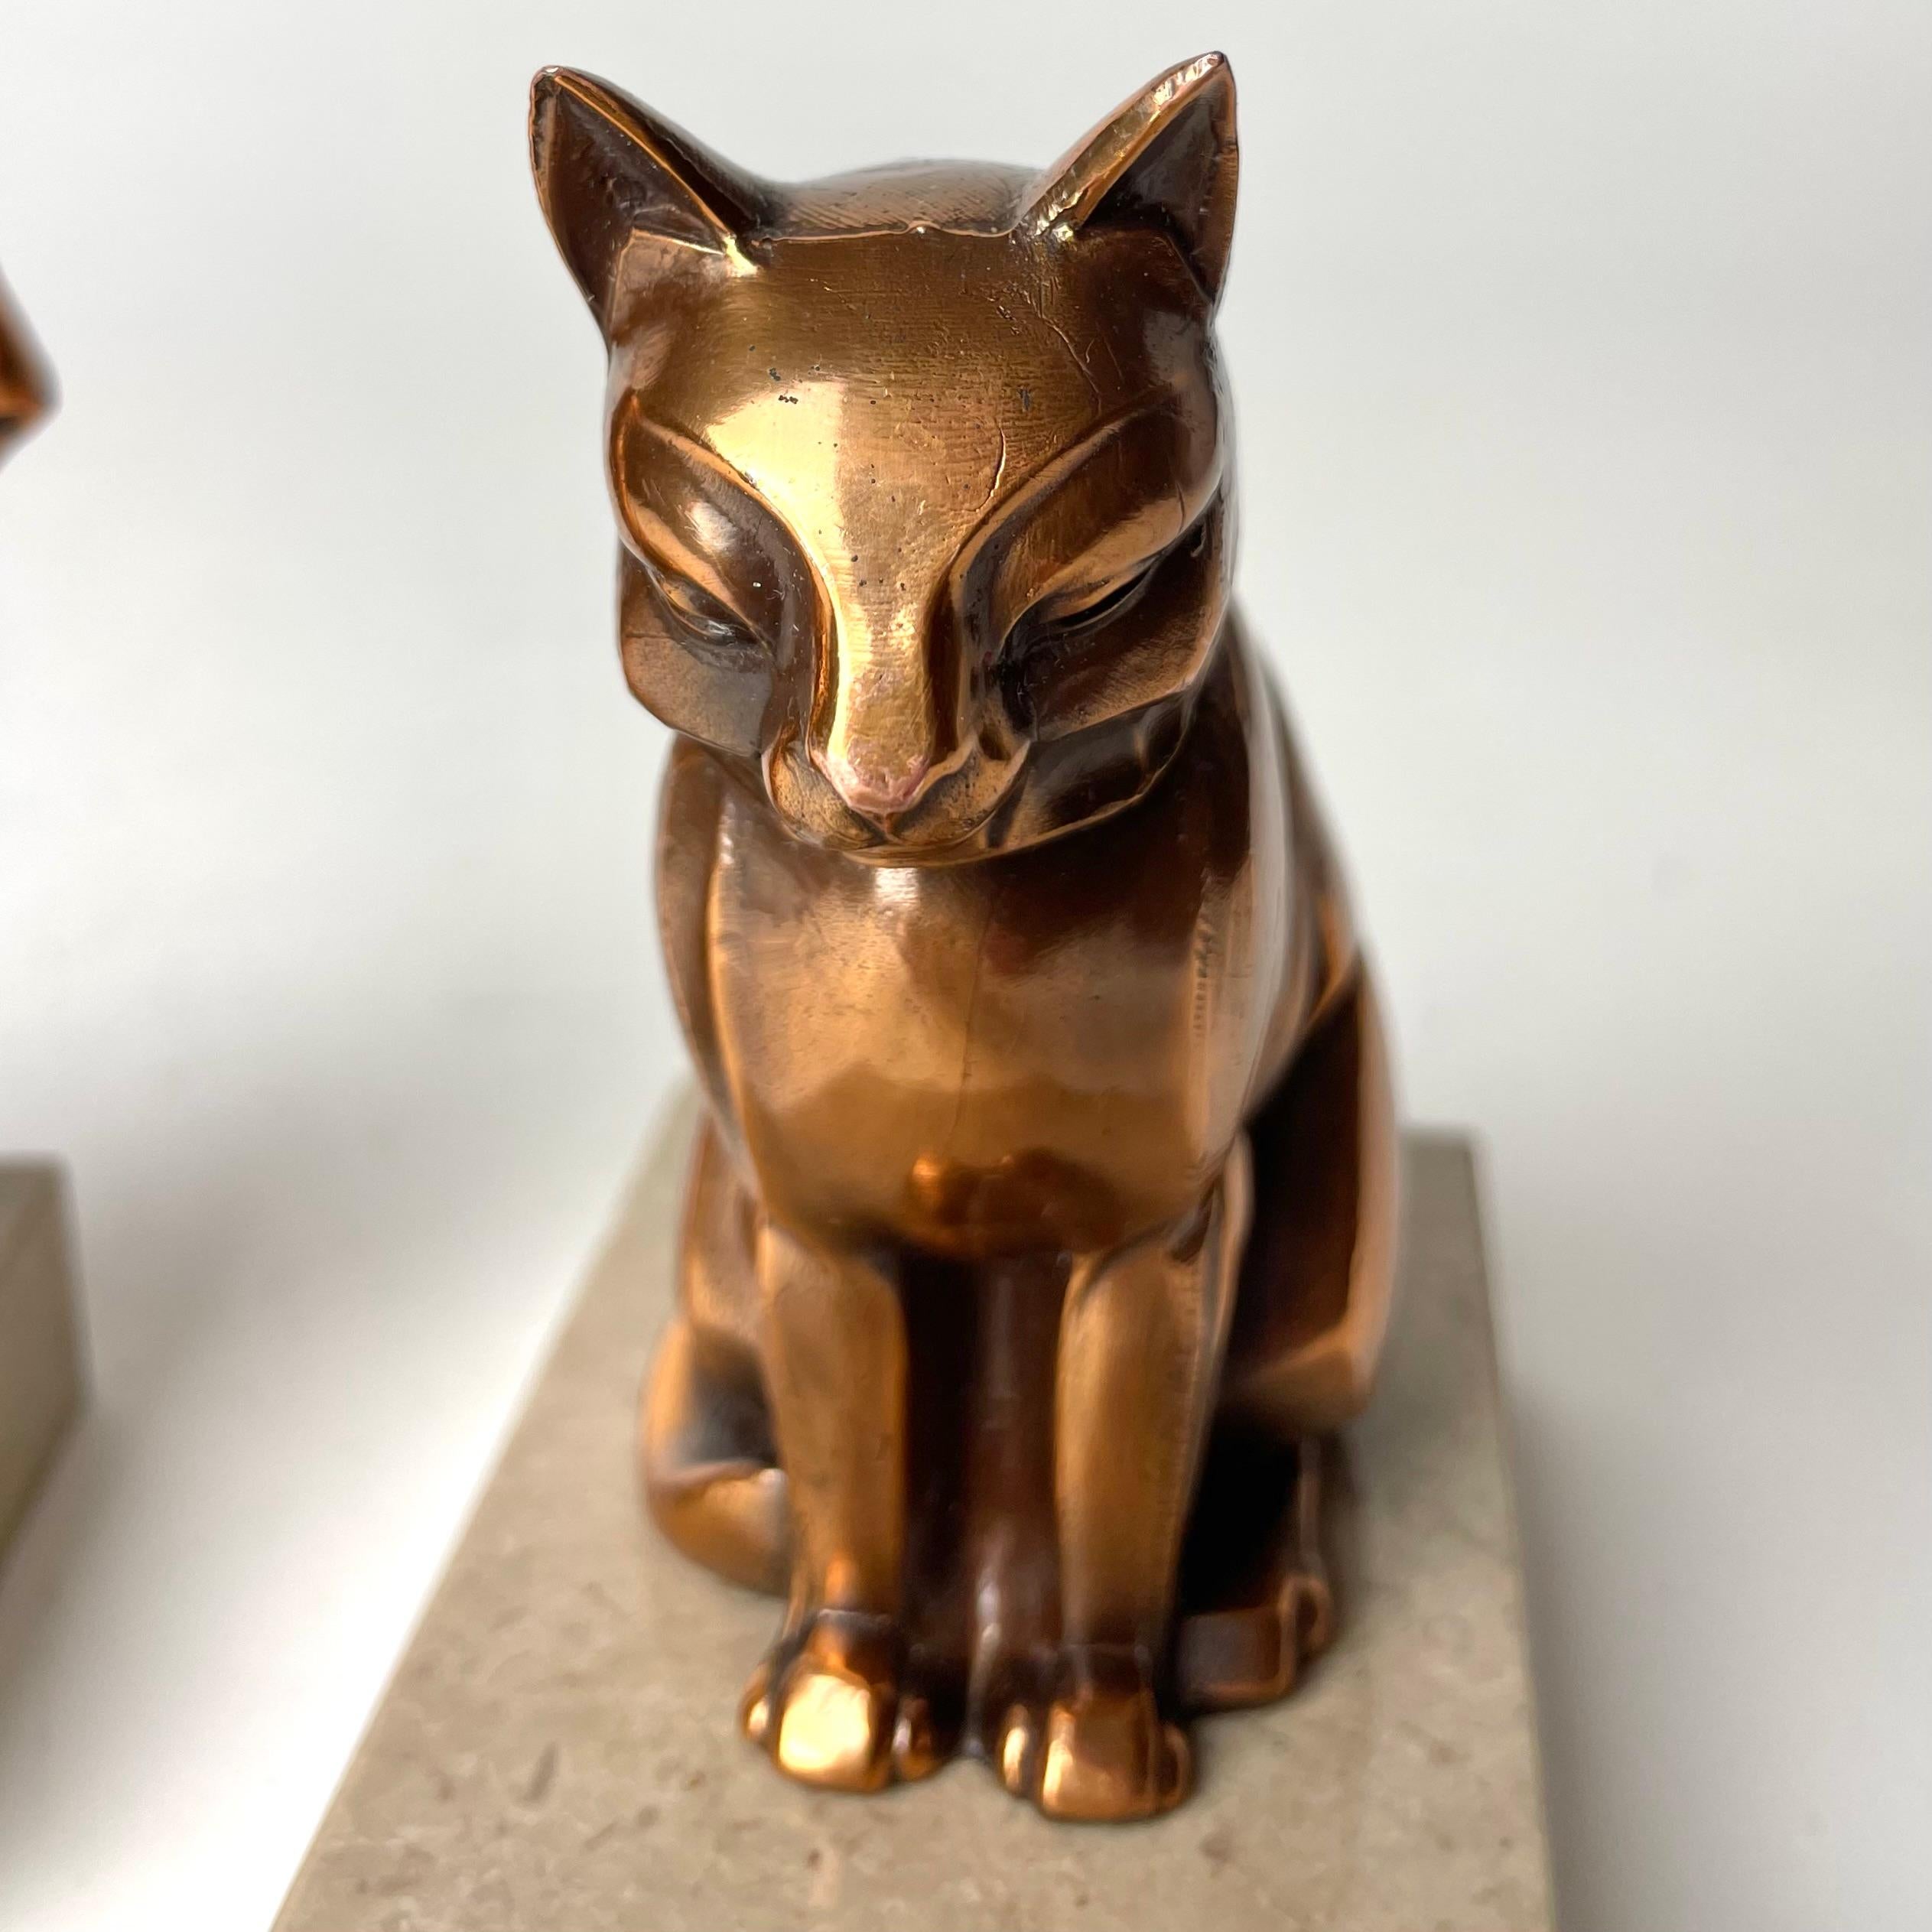 A pair of Cool Art Deco bookends from the 1920s-30s with period-typical cats 1